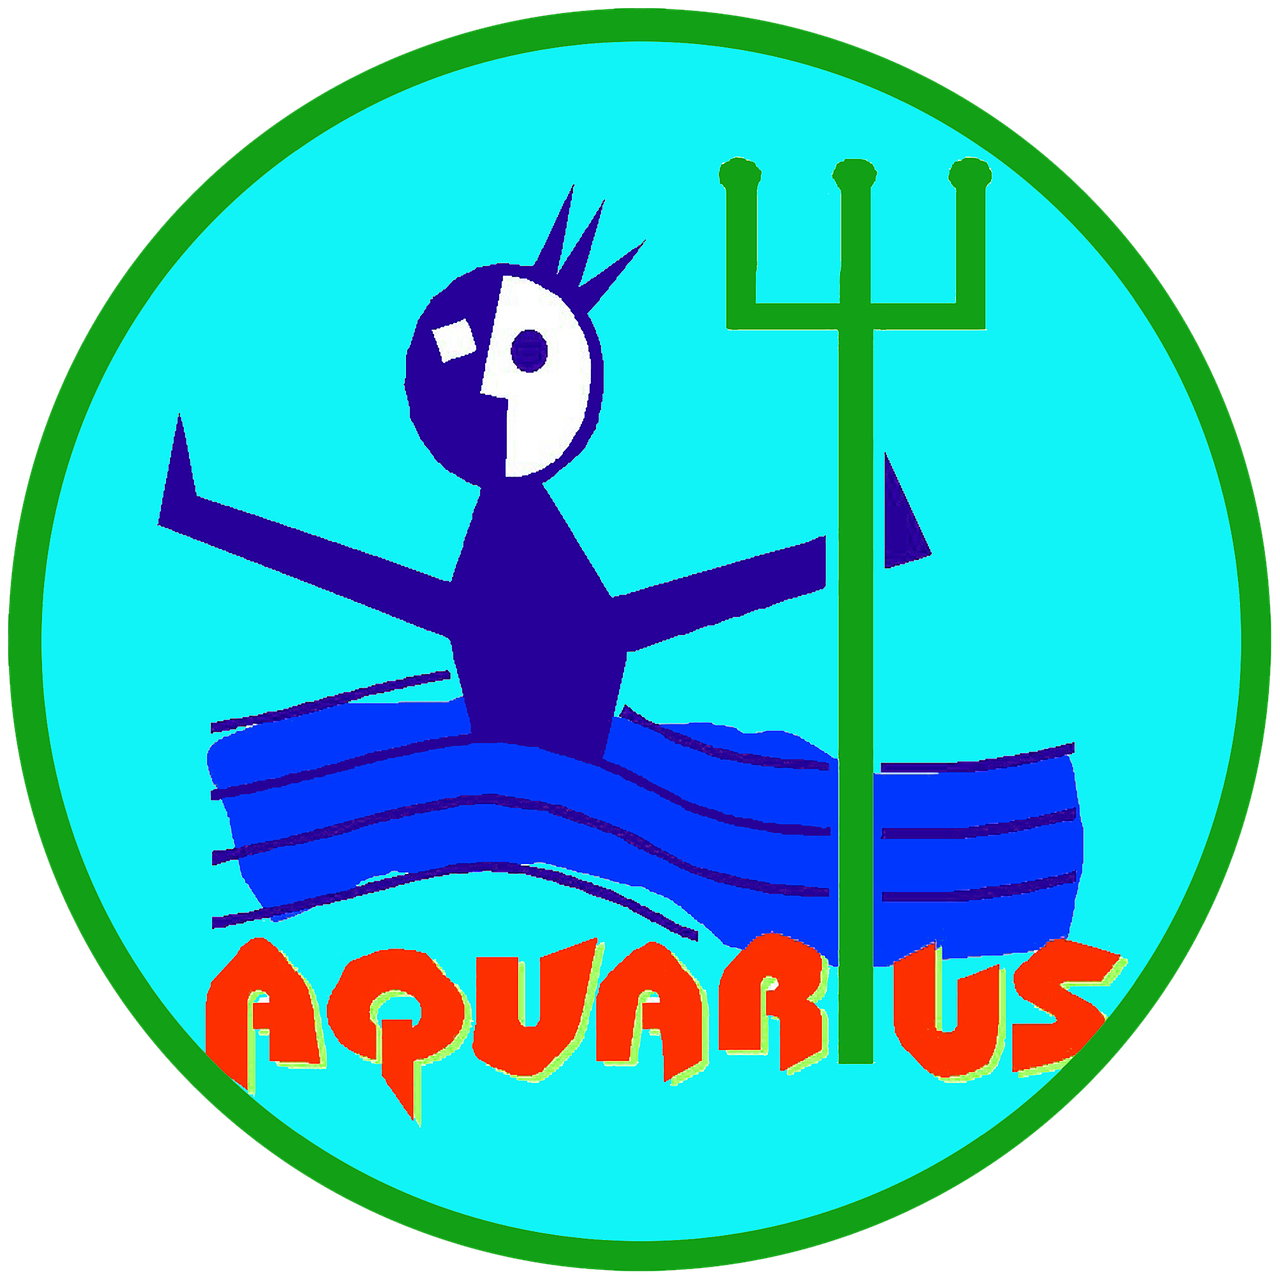 Download free photo of Aquarius,astrology,zodiac,horoscope,sign - from ...